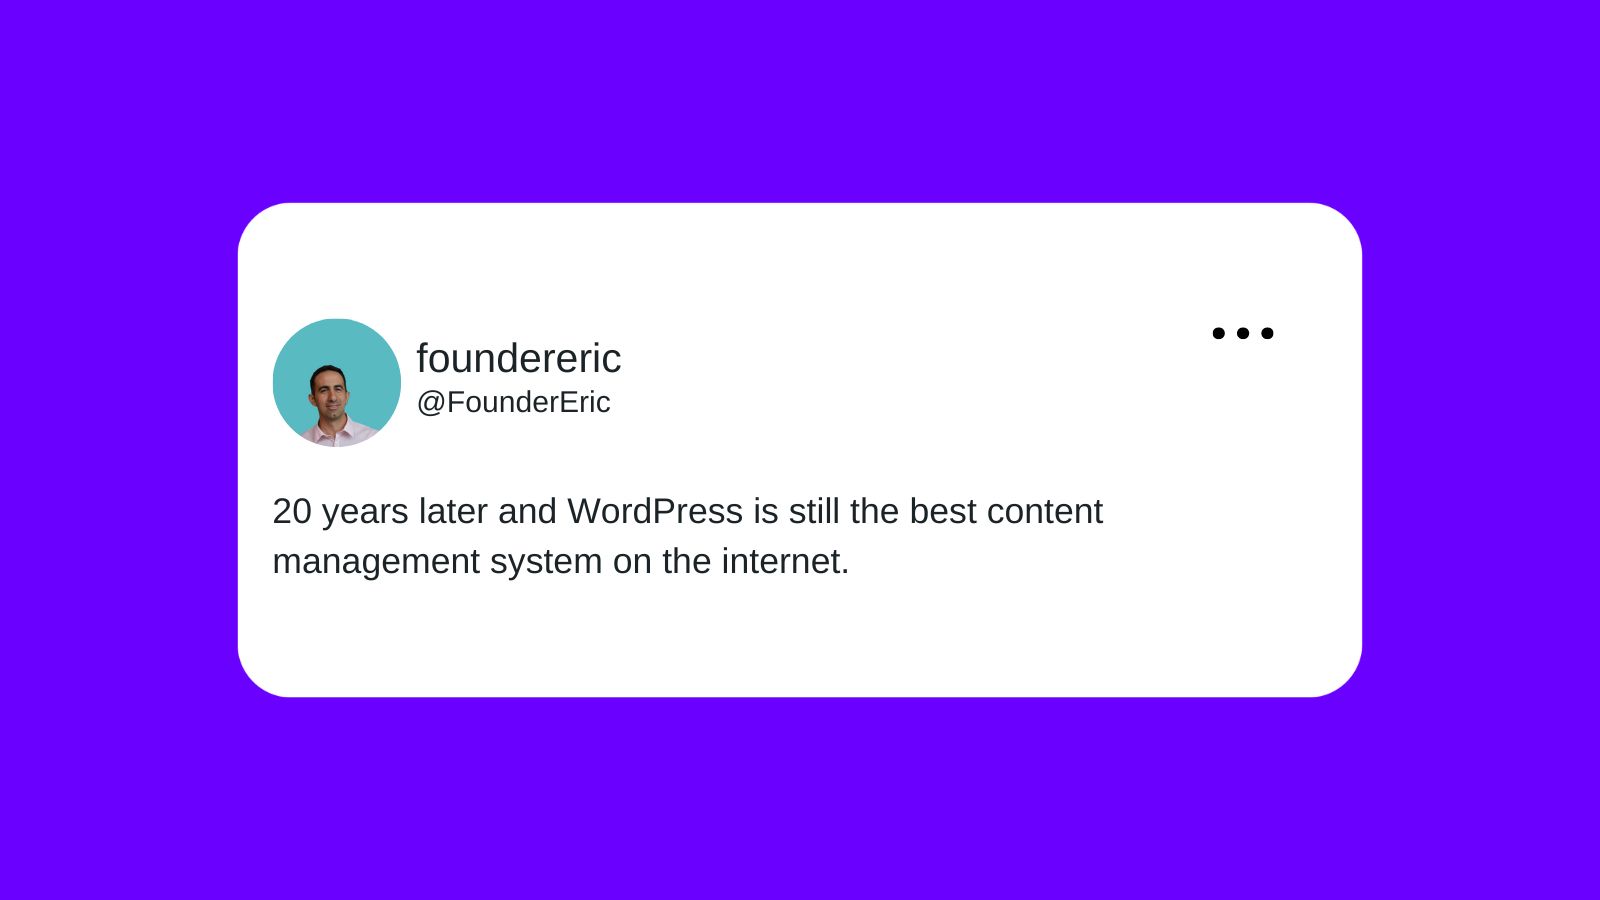 FounderEric tweeting "20 years later and WordPress is still the best content management system on the internet."